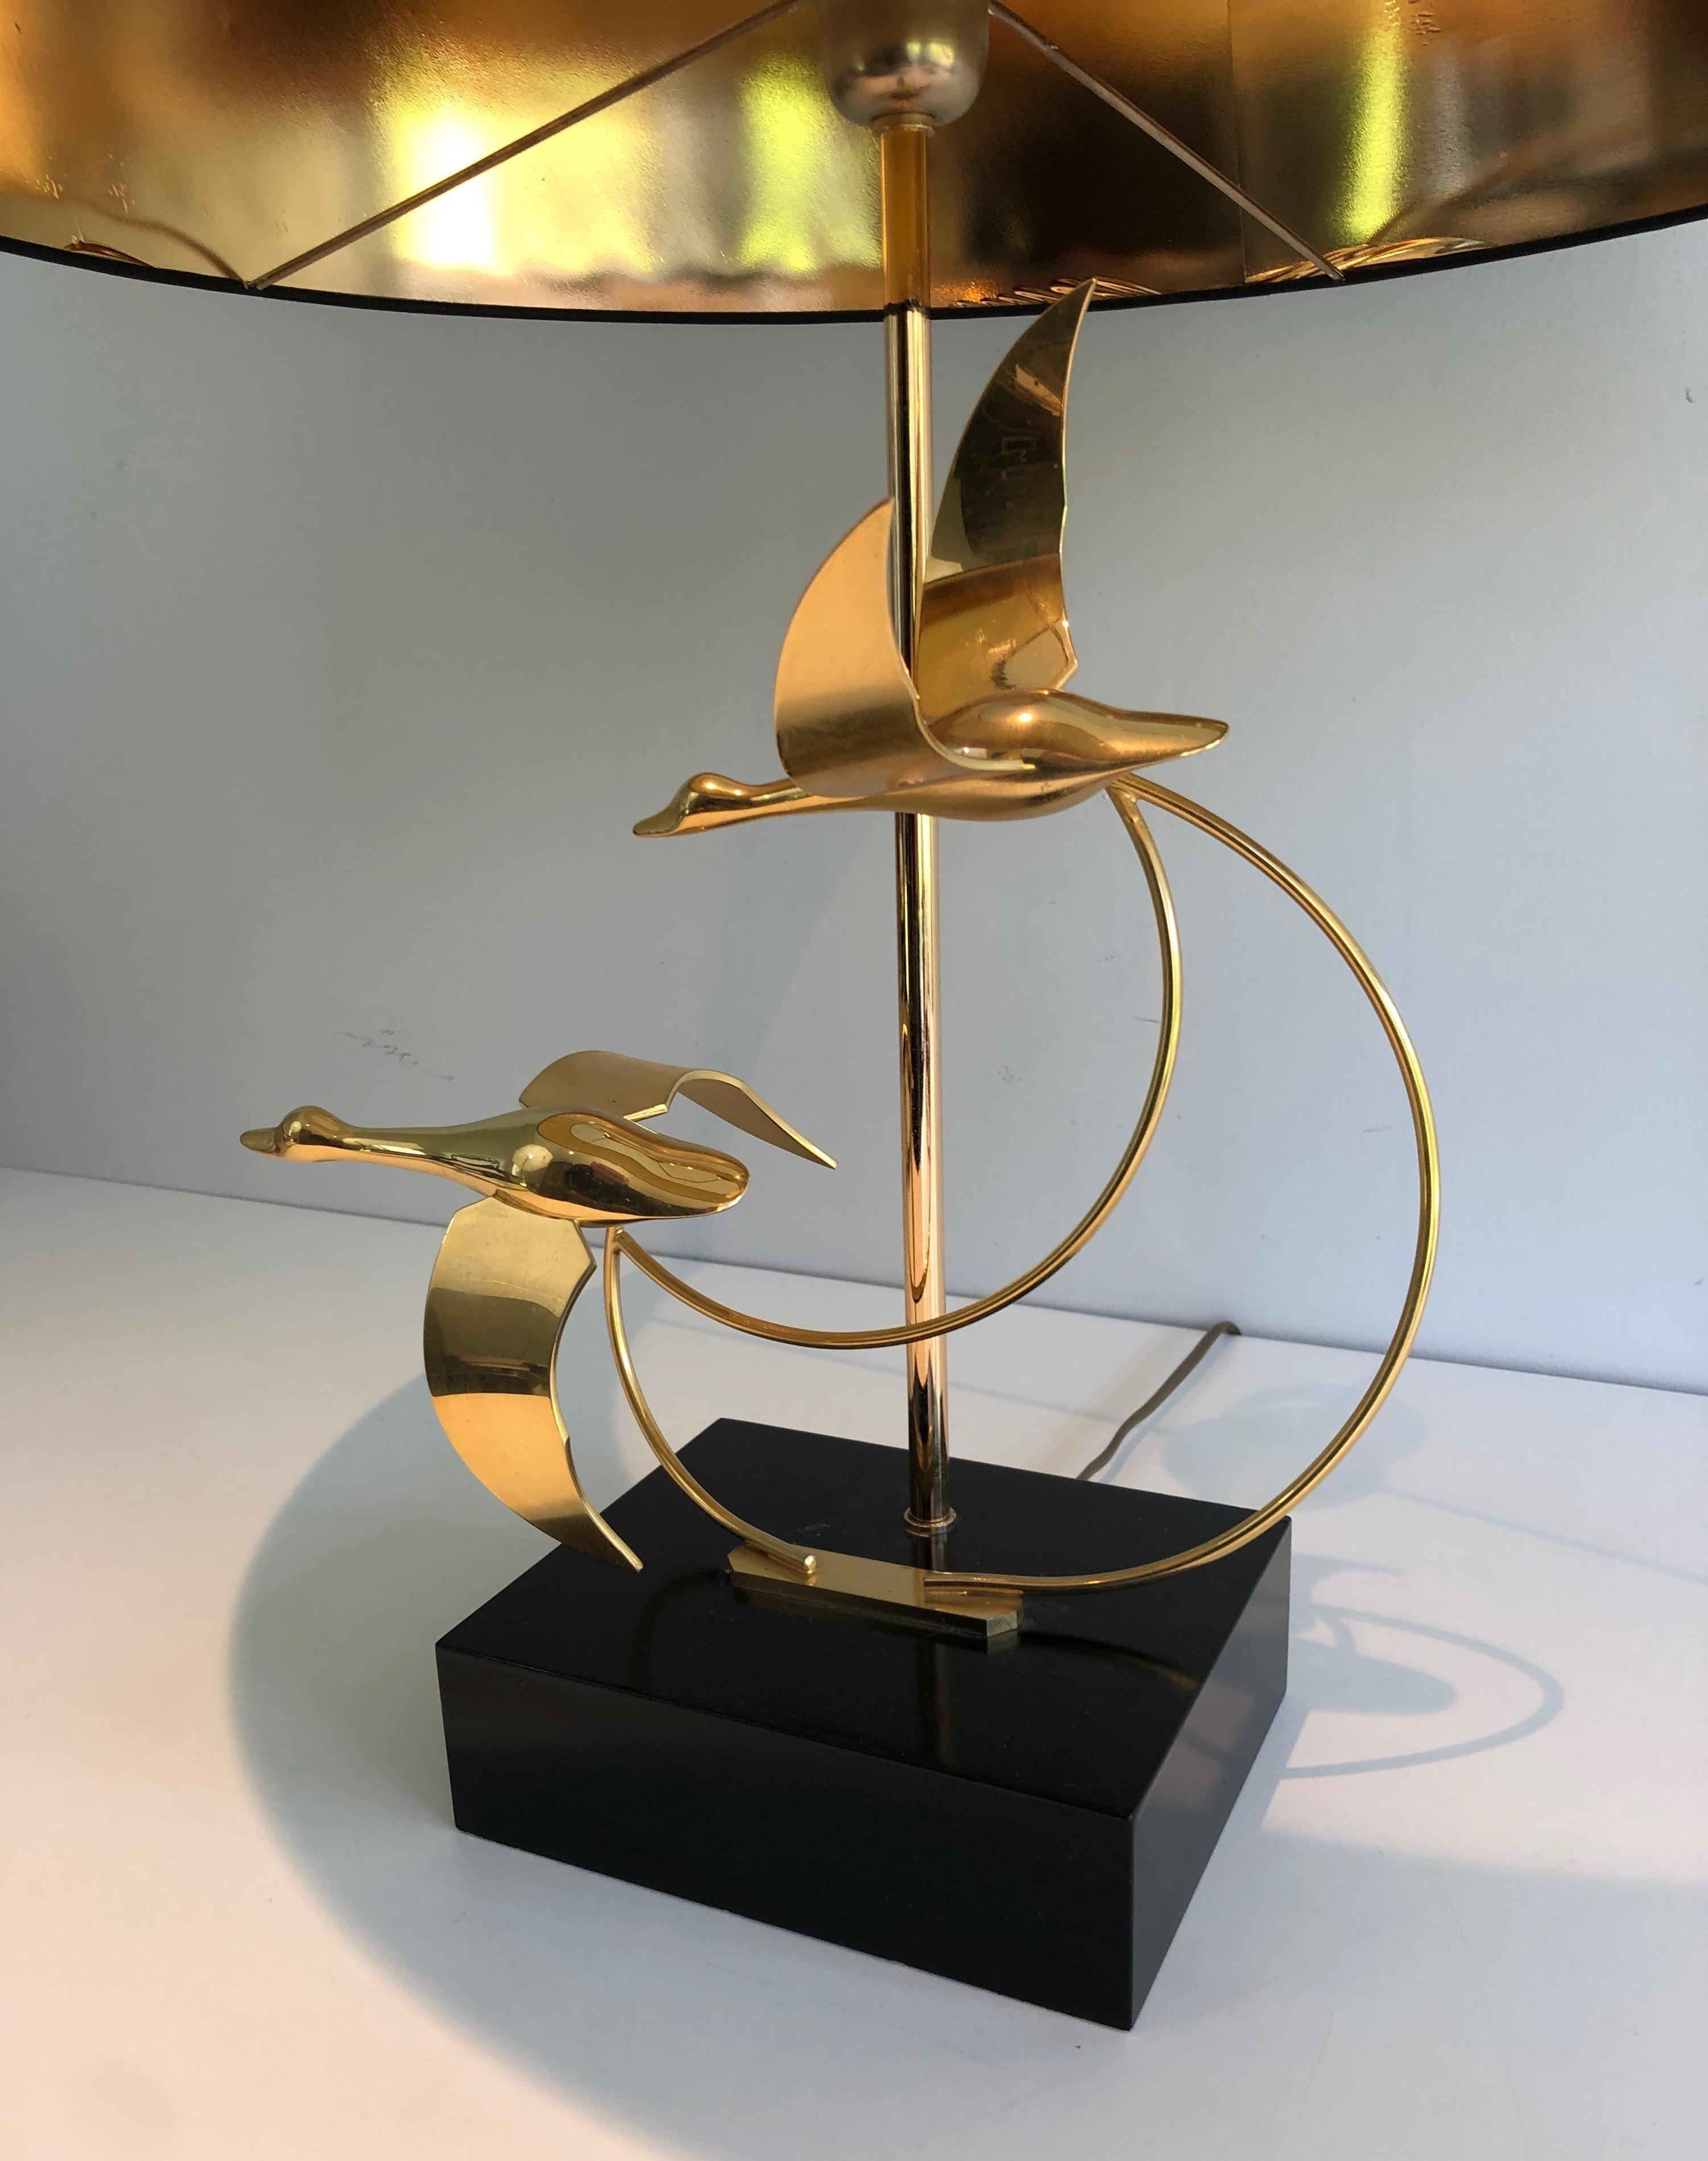 Flock of Wild Geese Brass Table Lamp, French, circa 1970 For Sale 3